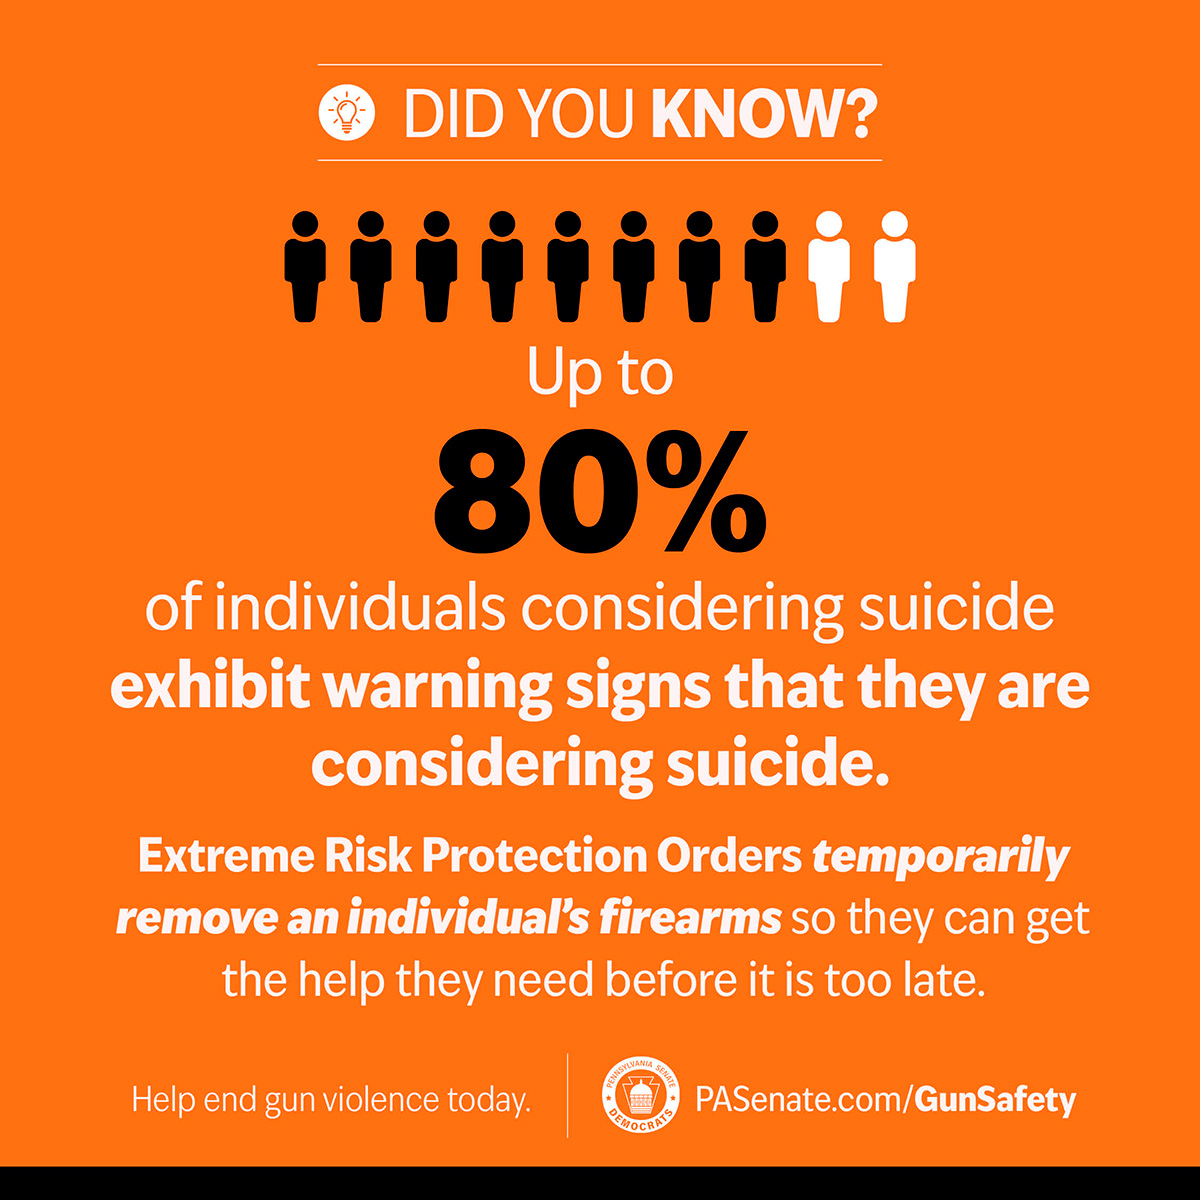 Did you know? Up to 80% of individuals considering suicide exhibit warning signs that they are considering suicide.